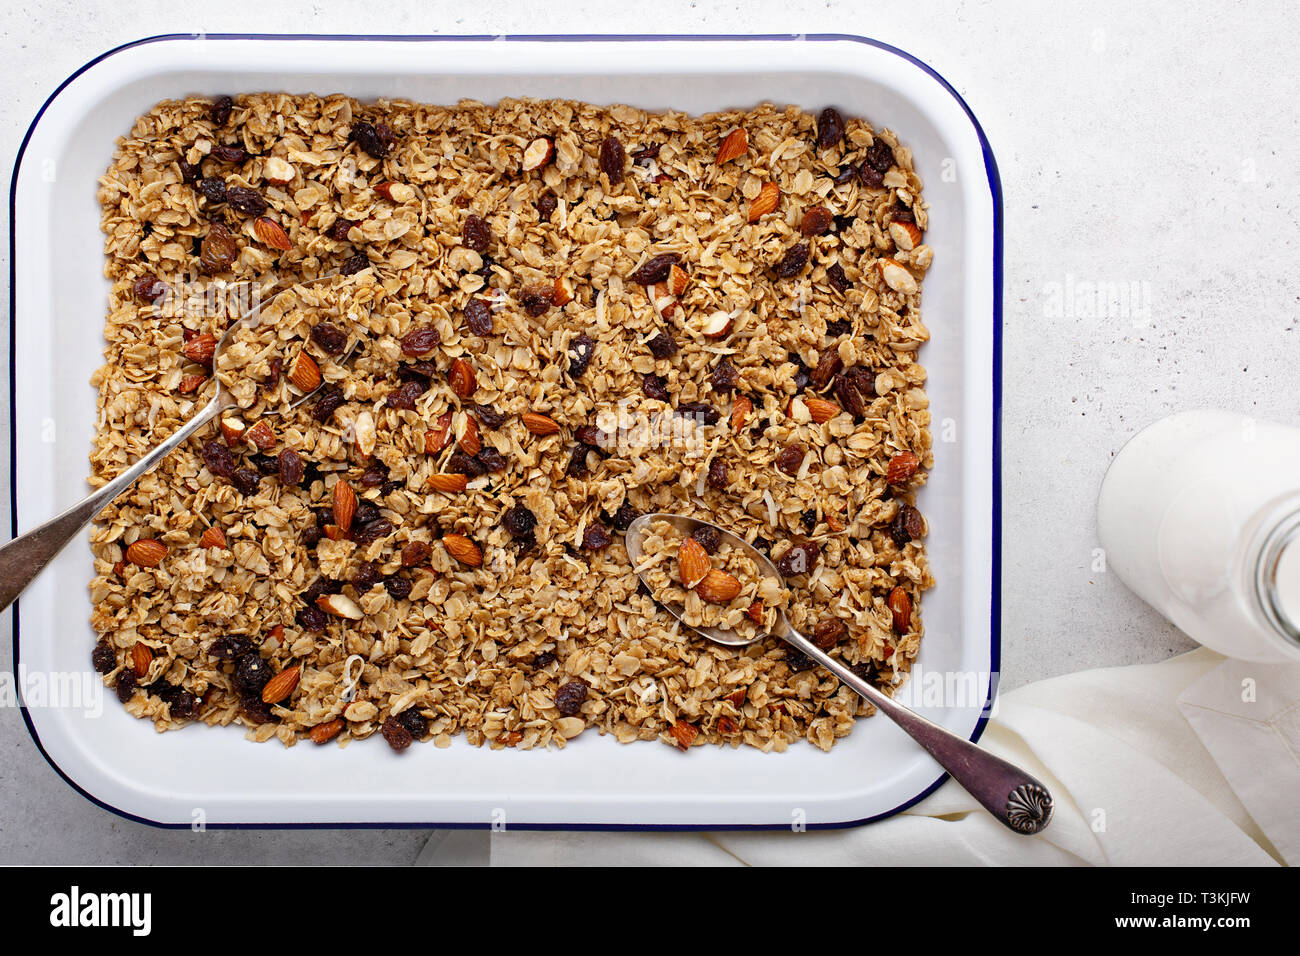 Homemade granola with coconut and almonds Stock Photo